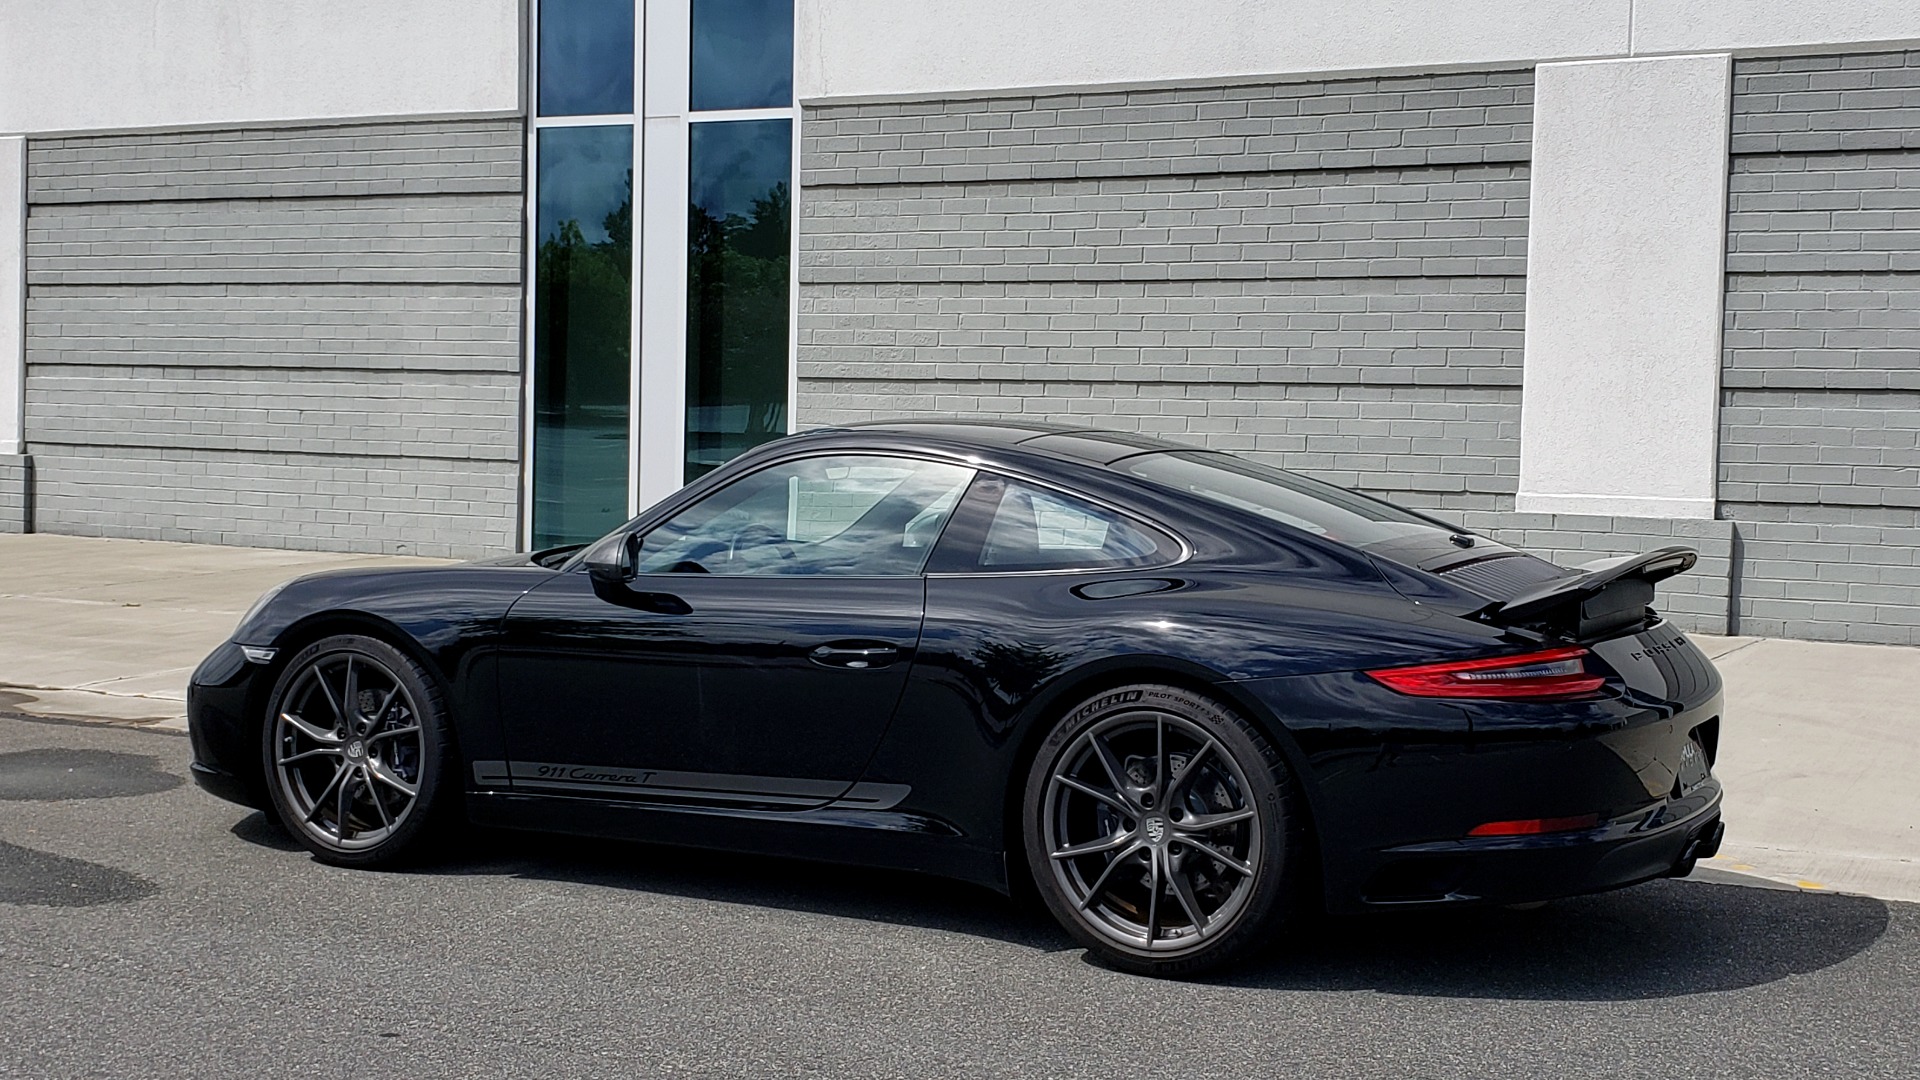 Used 2019 Porsche 911 CARRERA T / 3.0L H6 / MANUAL / PREMIUM / NAV / BOSE / SUNROOF / REARVIEW for sale Sold at Formula Imports in Charlotte NC 28227 7